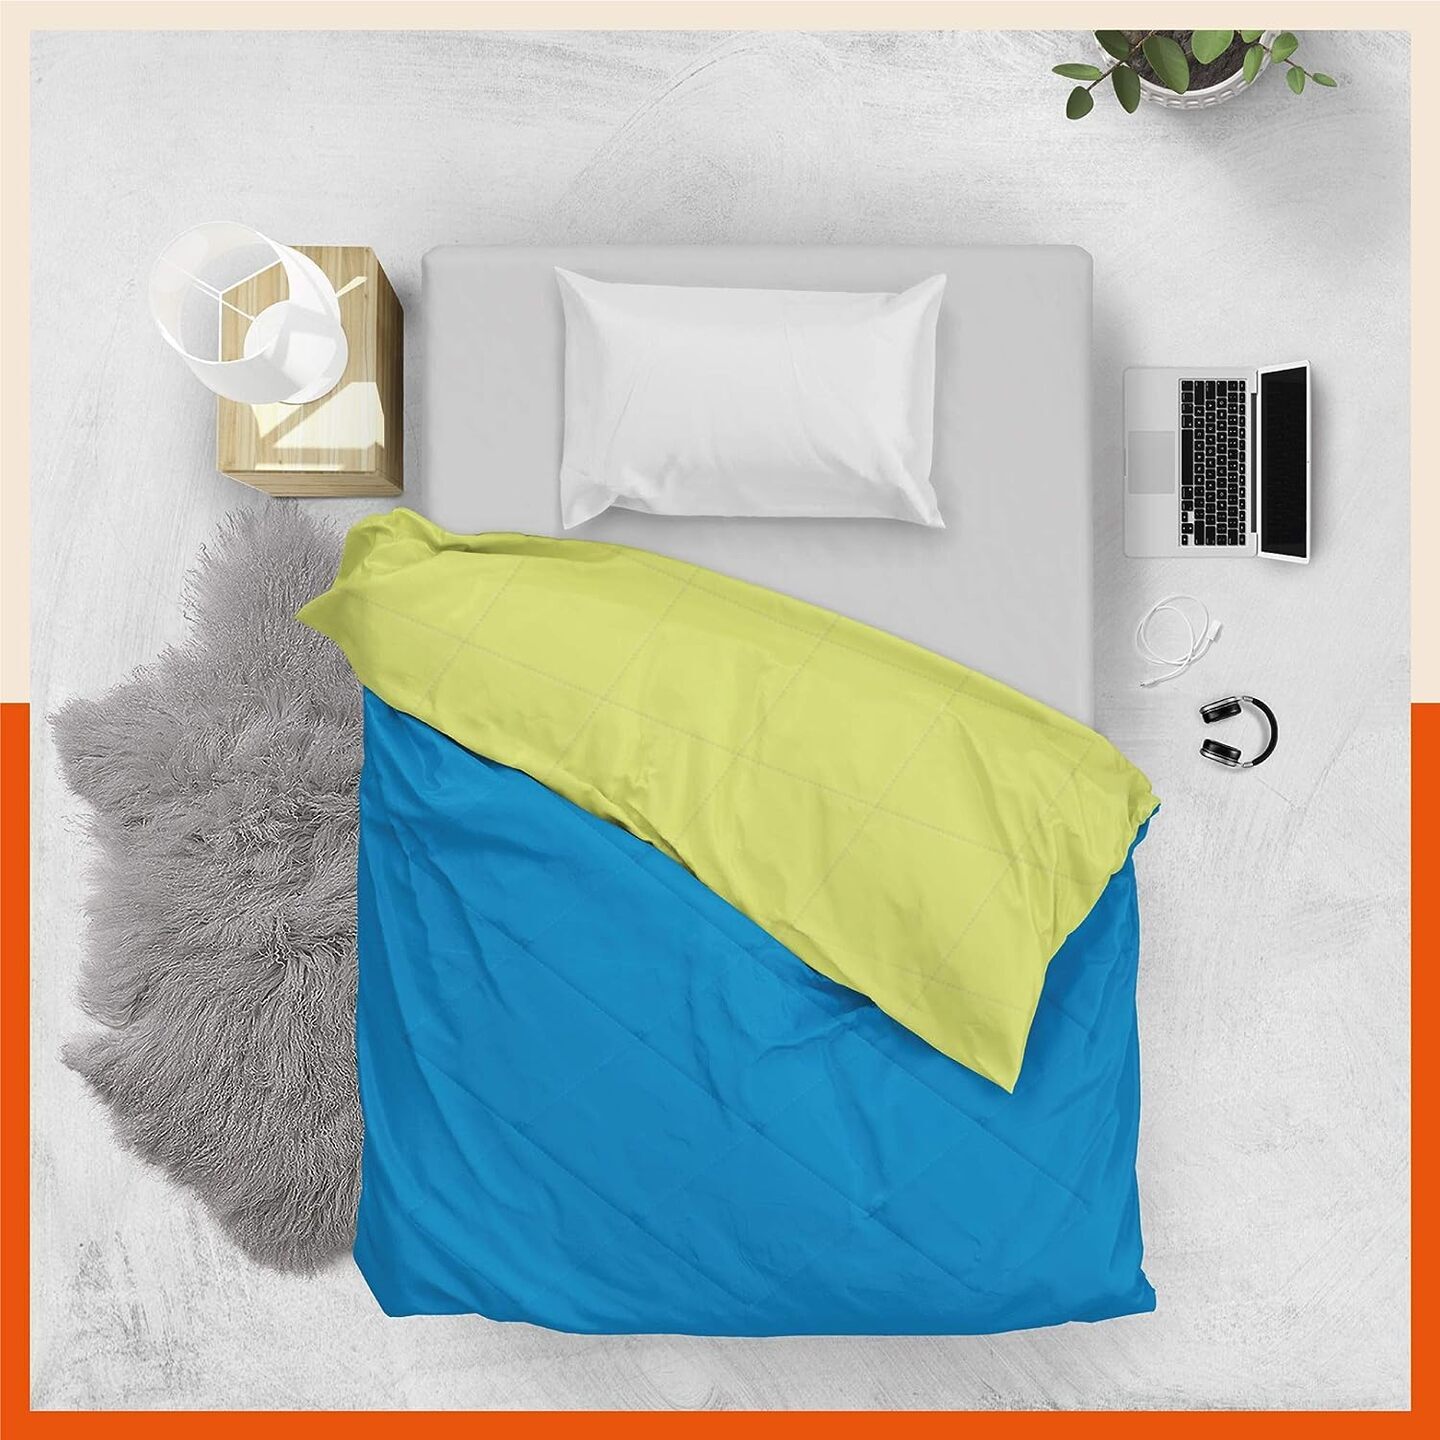 Reversible Microfiber Comforter with Ultra-Soft Fabric Cover & Siliconised Fill